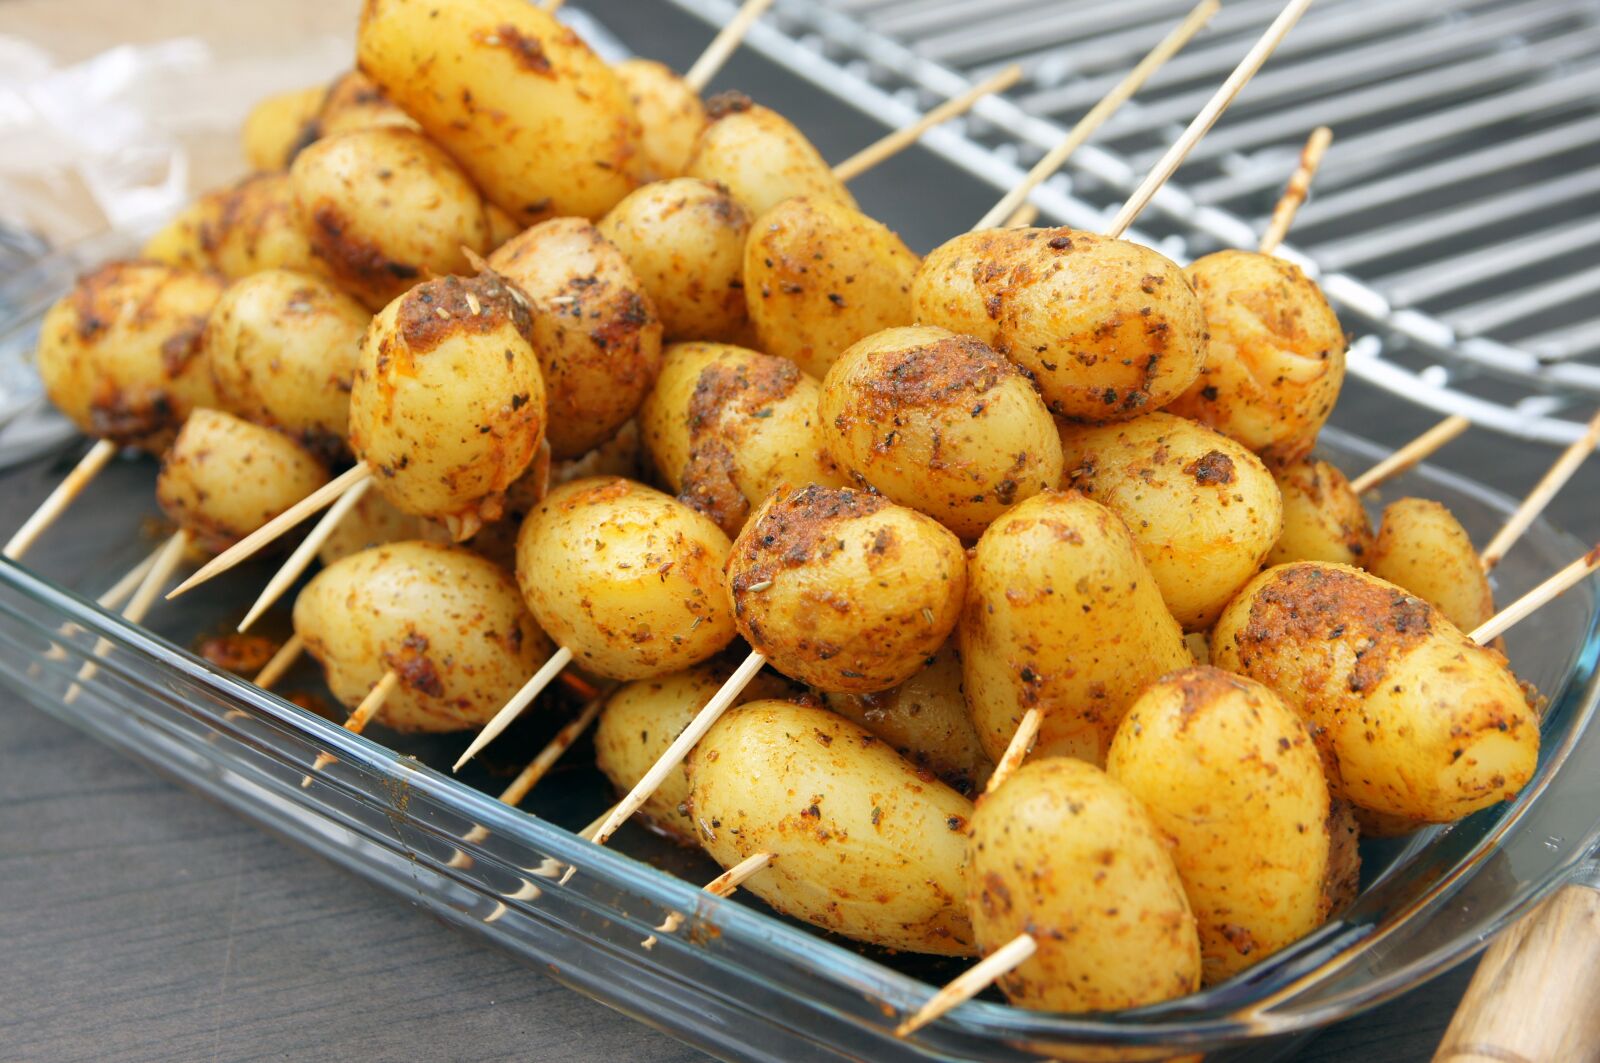 17-50mm F2.8 sample photo. Rosemary potatoes, barbecue, out photography